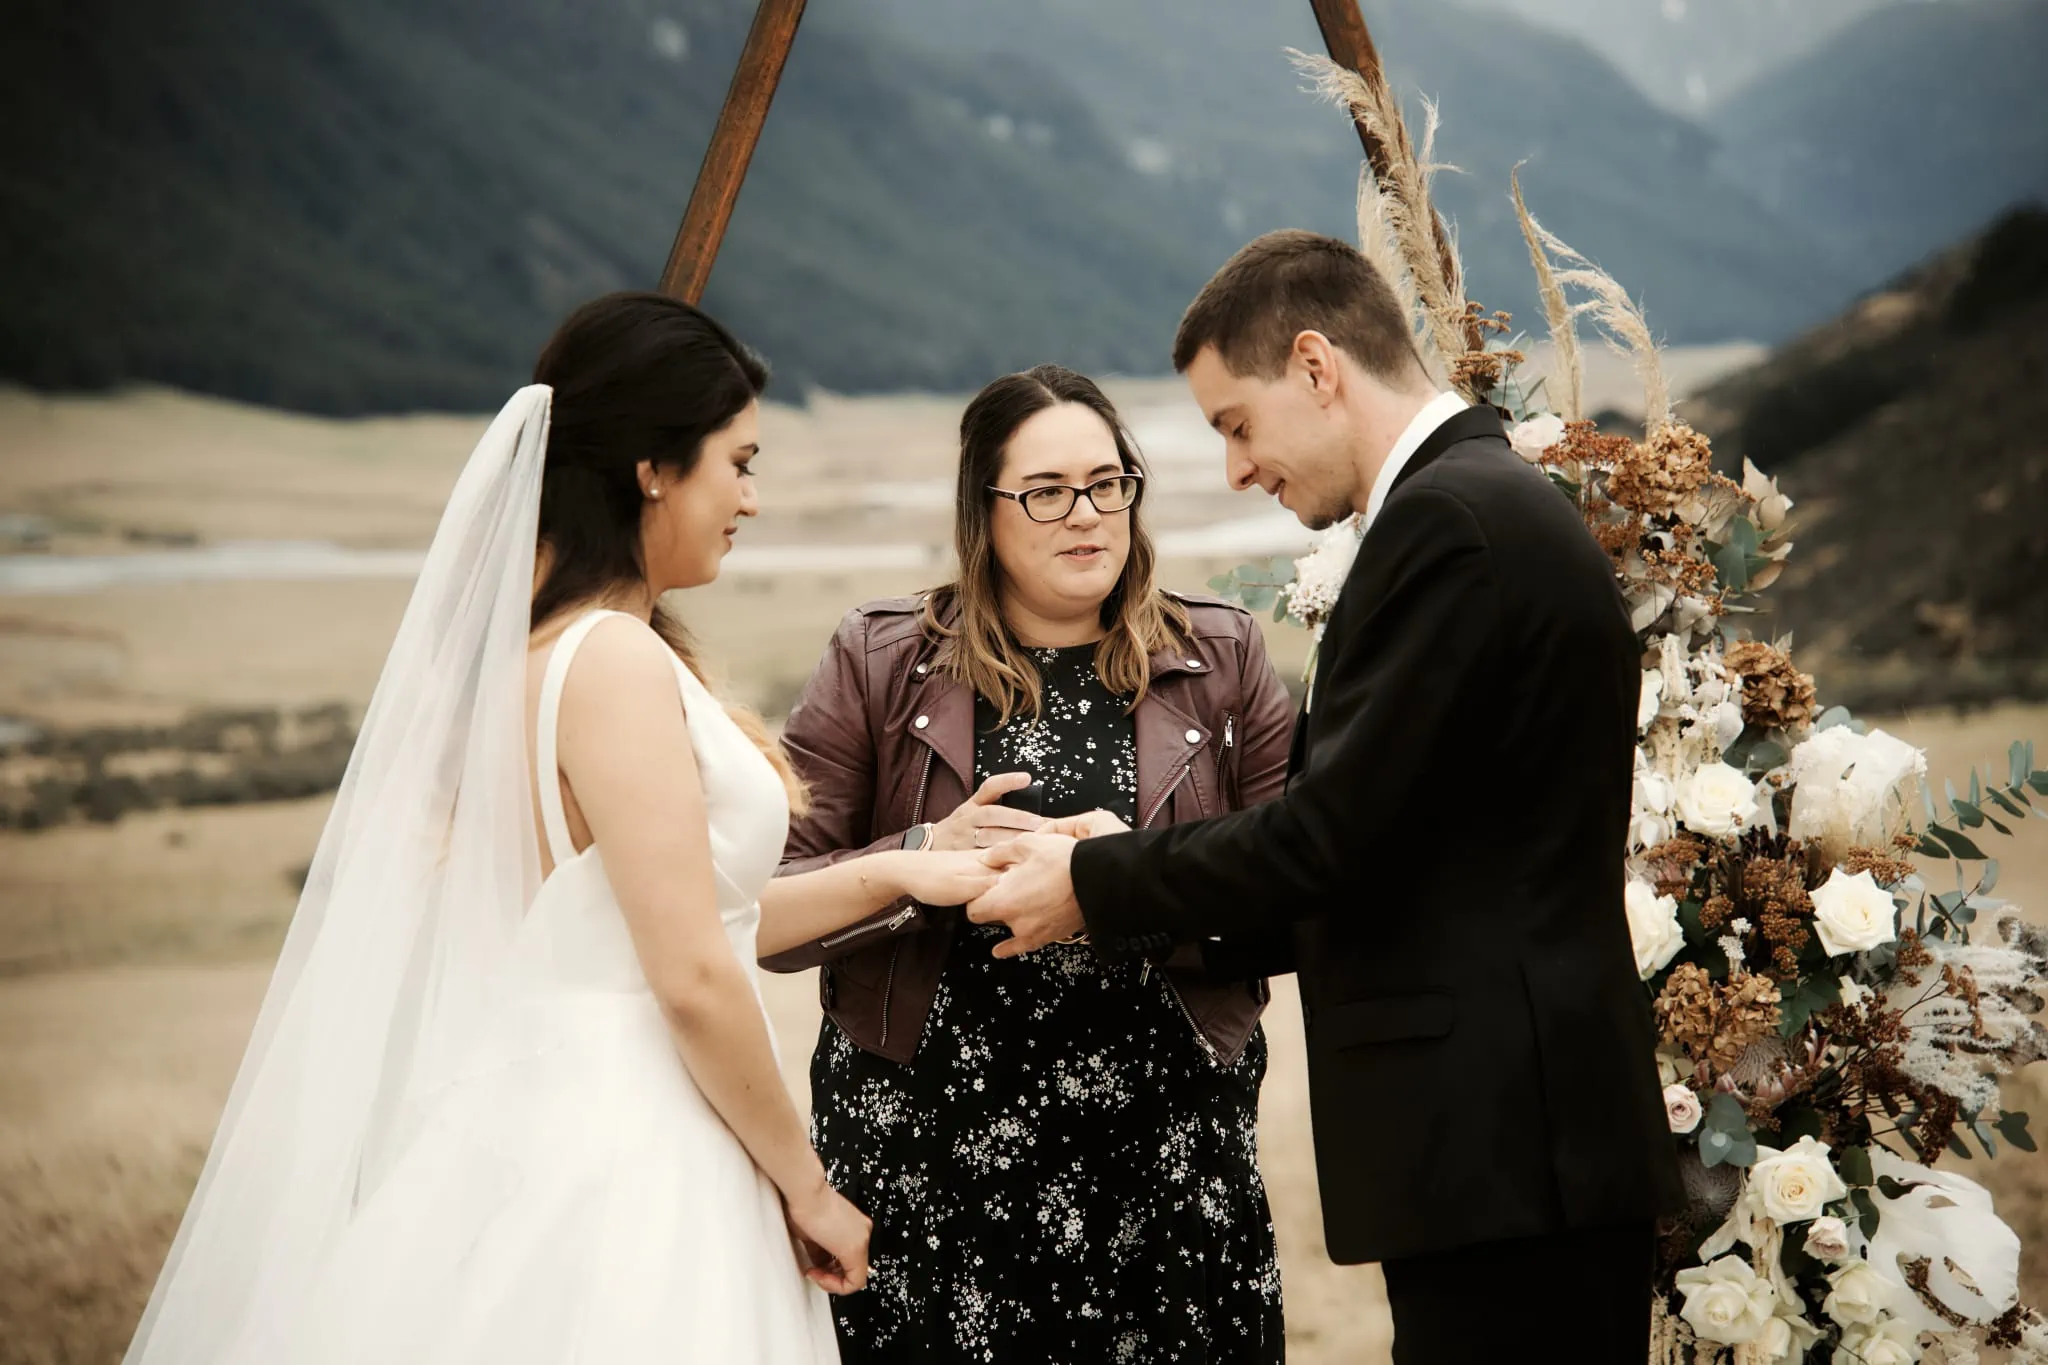 Michelle and Vedran exchange rings during their Rees Valley Station elopement wedding.